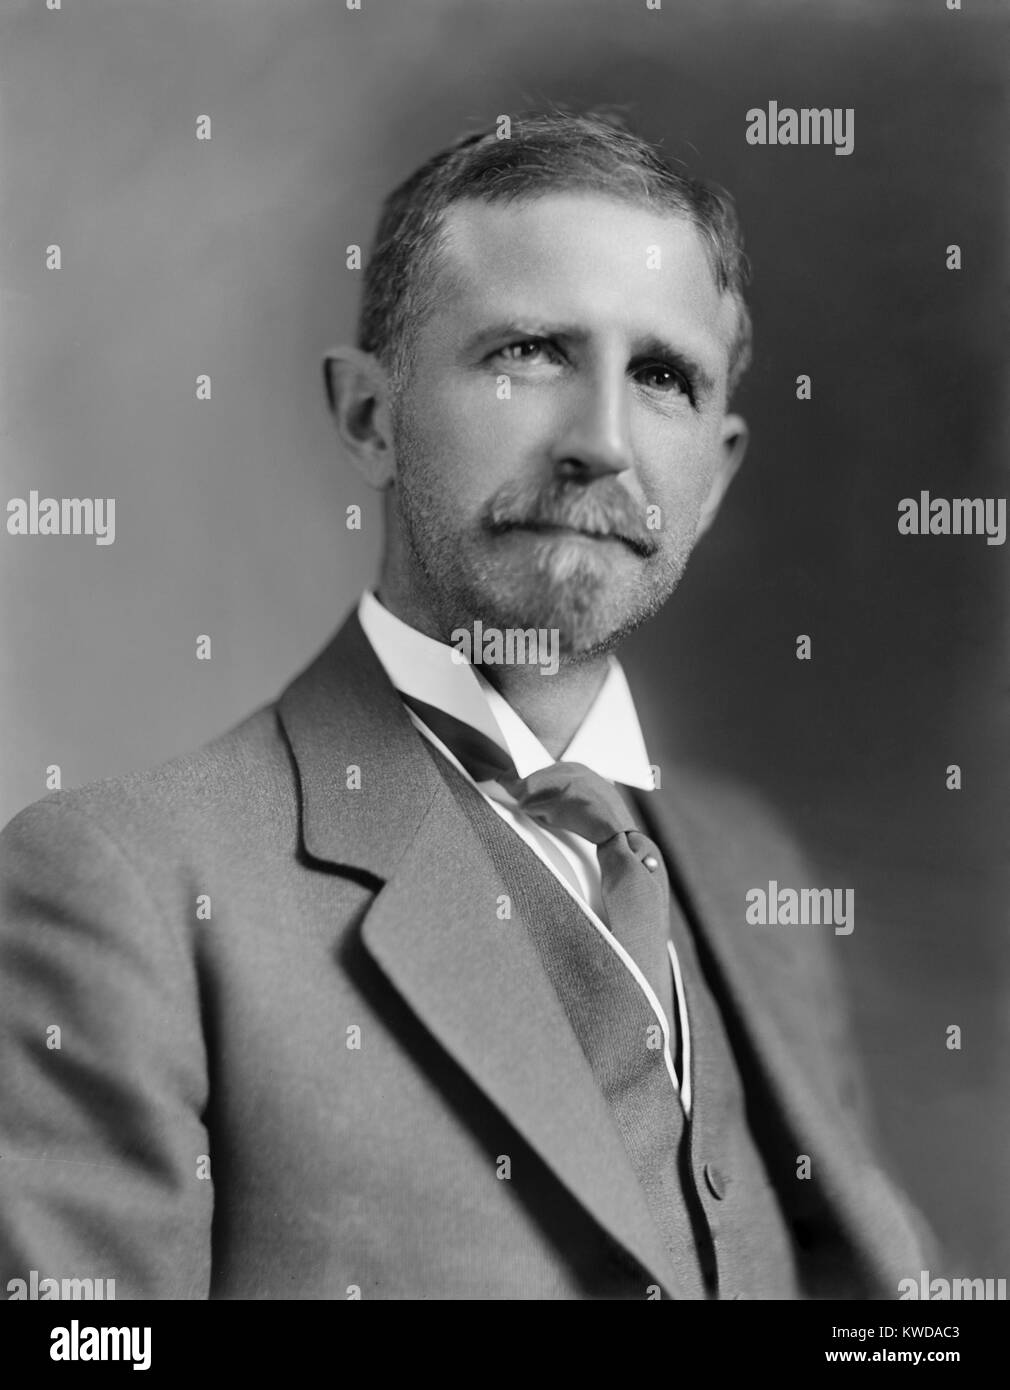 Roger Ward Babson was an American businessman, economist, business theorist and author, c. 1920. On Sept. 5, 1929, he predicted the Stock Market crash, 'Sooner or later a crash is coming, and it may be terrific' (BSLOC 2016 8 19) Stock Photo